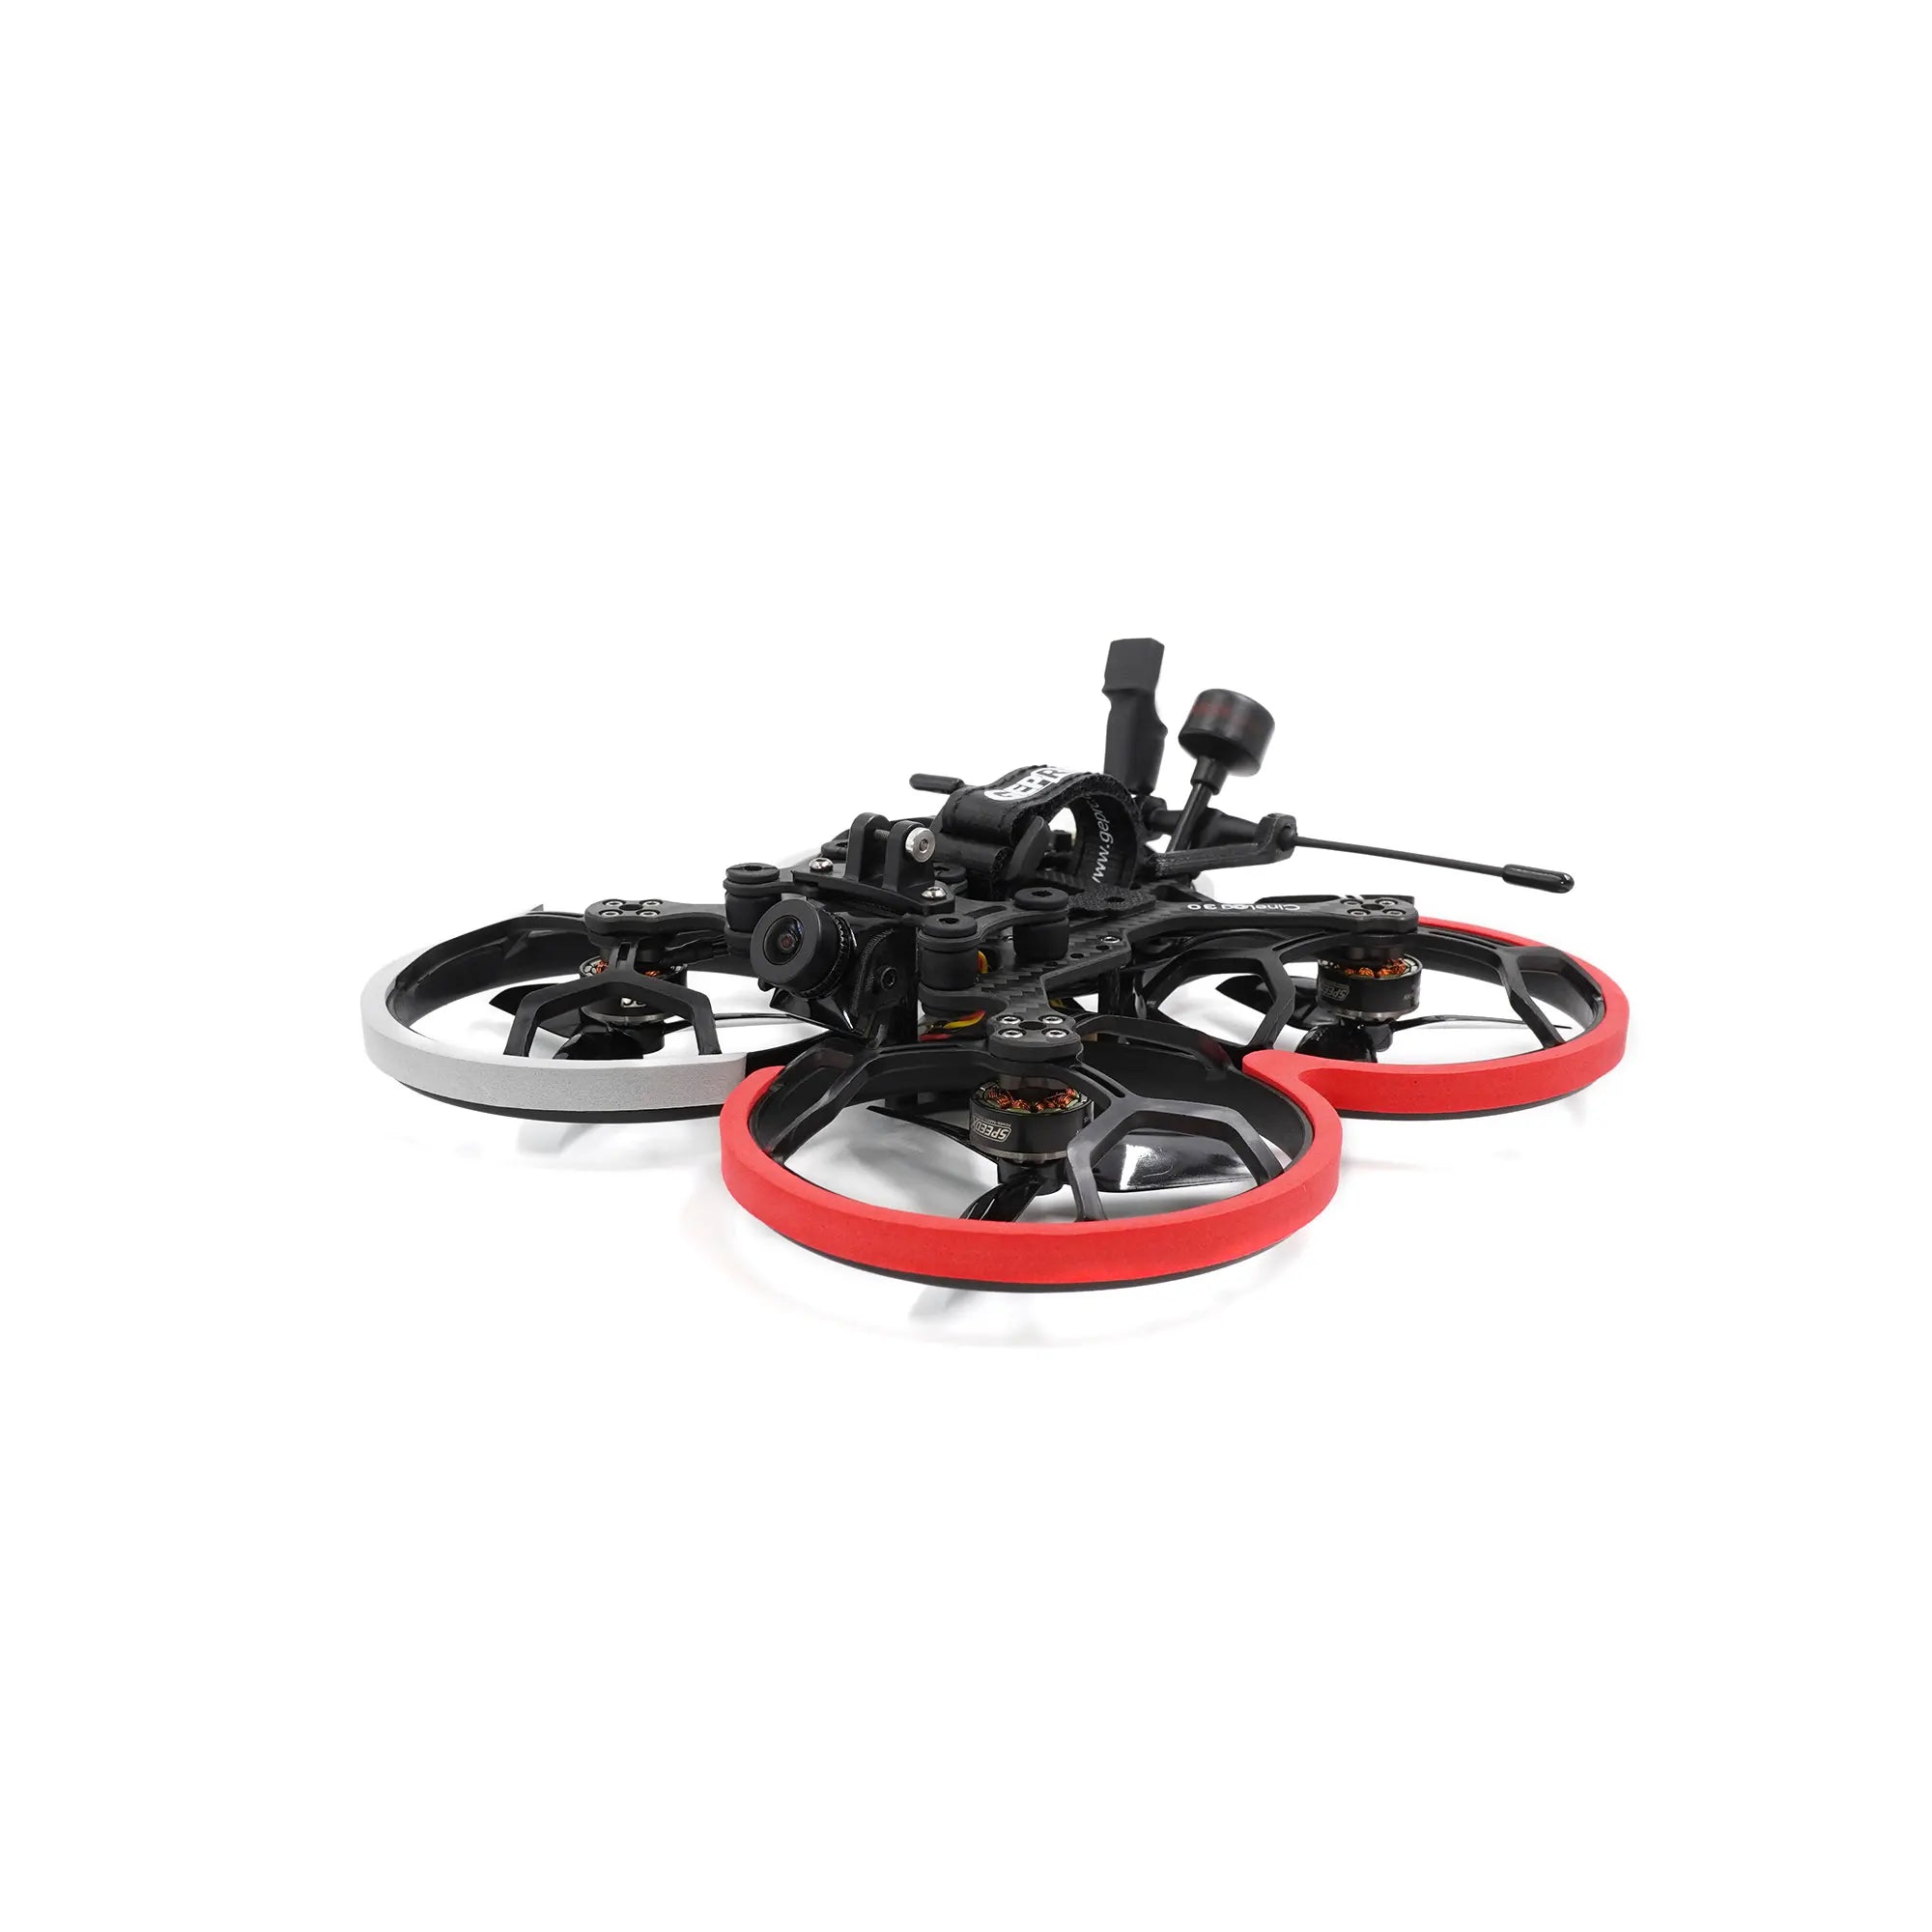 GEPRC CineLog30 Cinewhoop Drone, the drone can endure crashes and impacts, providing durability for prolonged use . with its robust 2.0